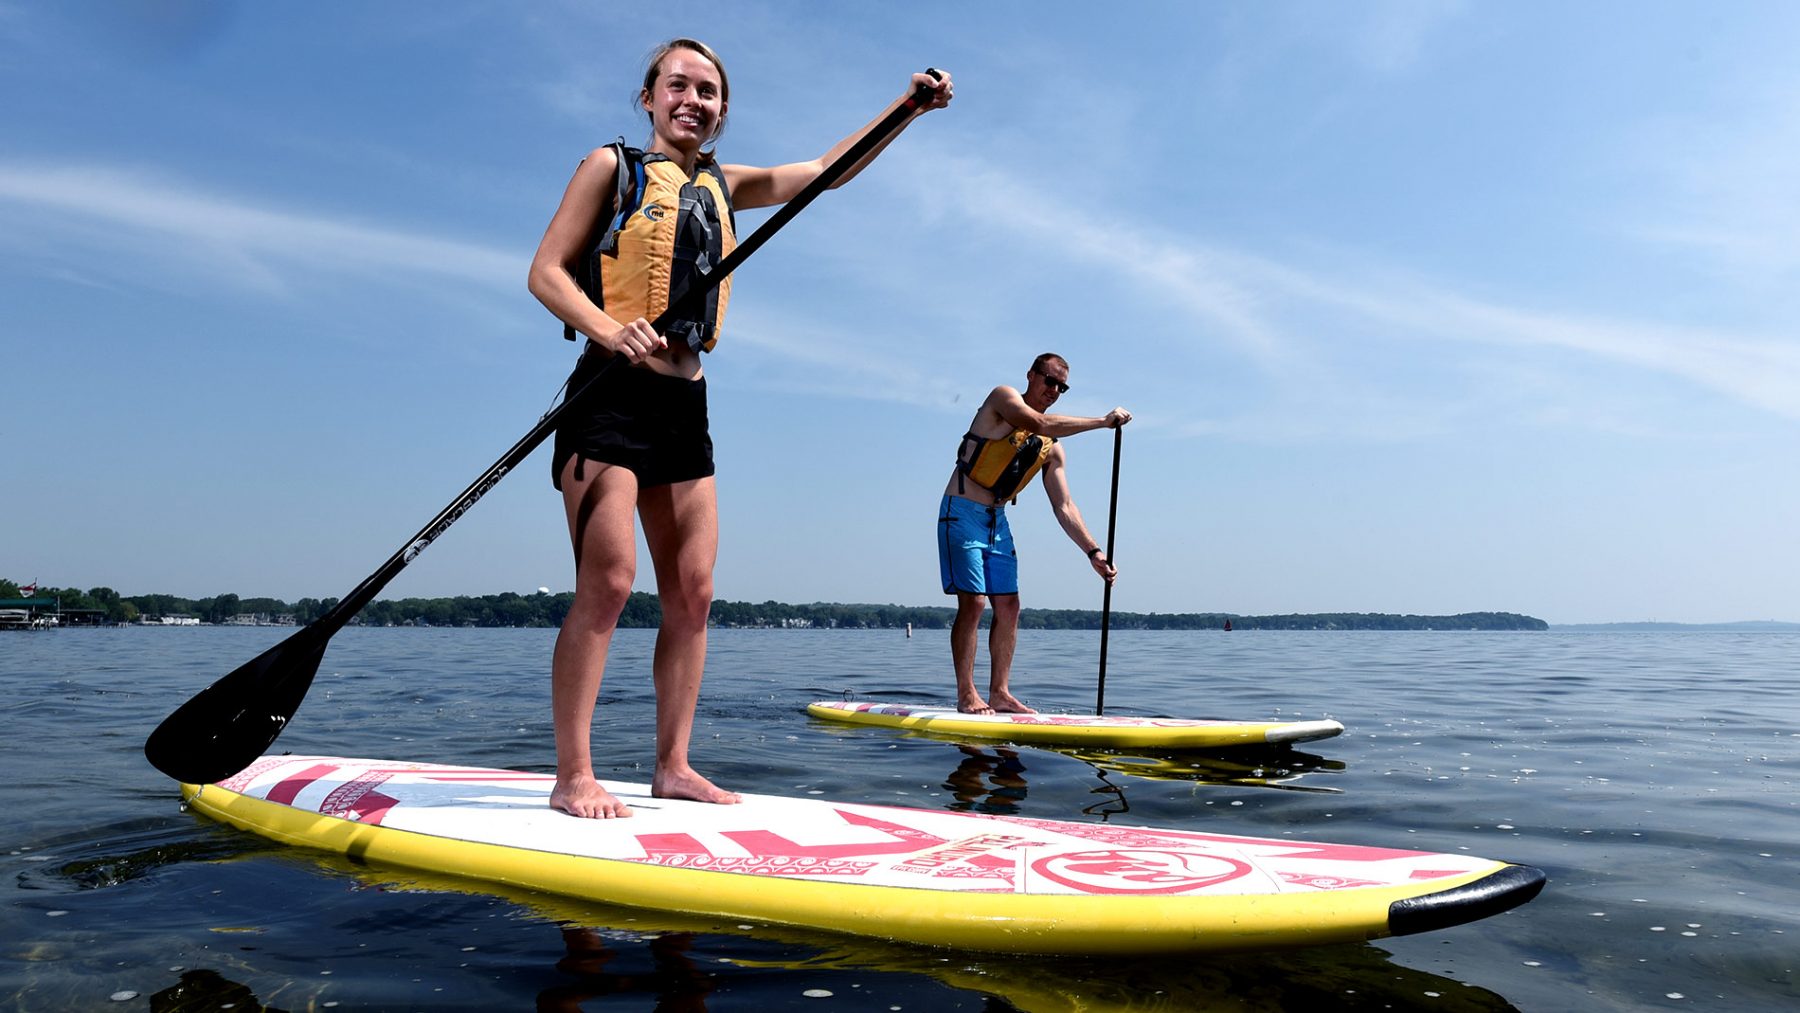 Discover Wisconsin's refreshing lakes